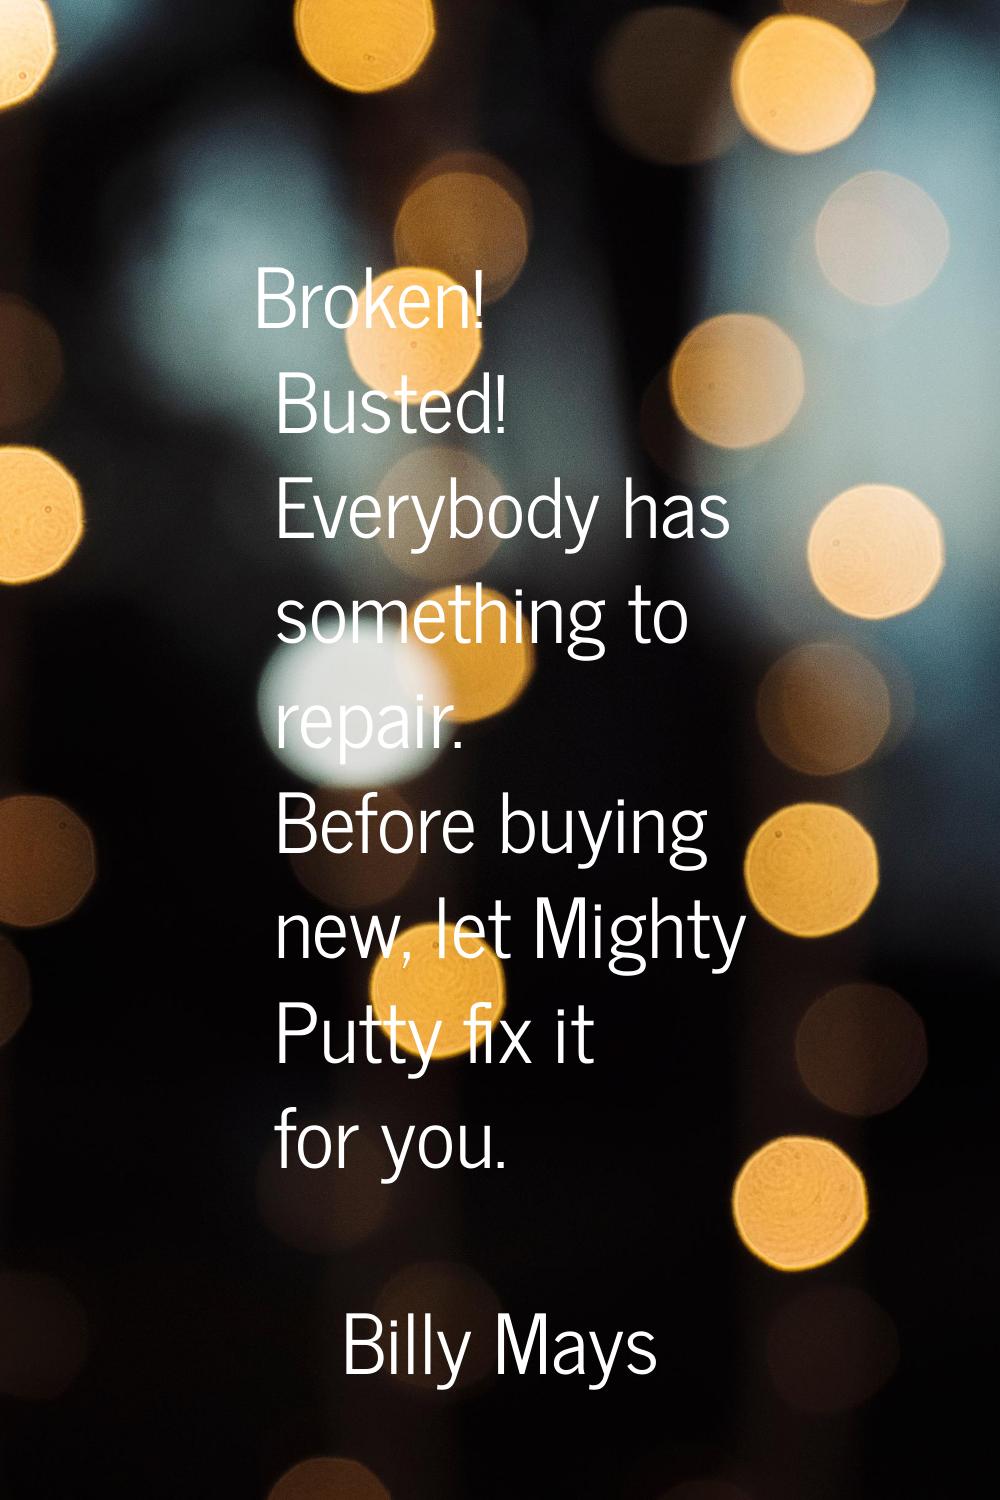 Broken! Busted! Everybody has something to repair. Before buying new, let Mighty Putty fix it for y